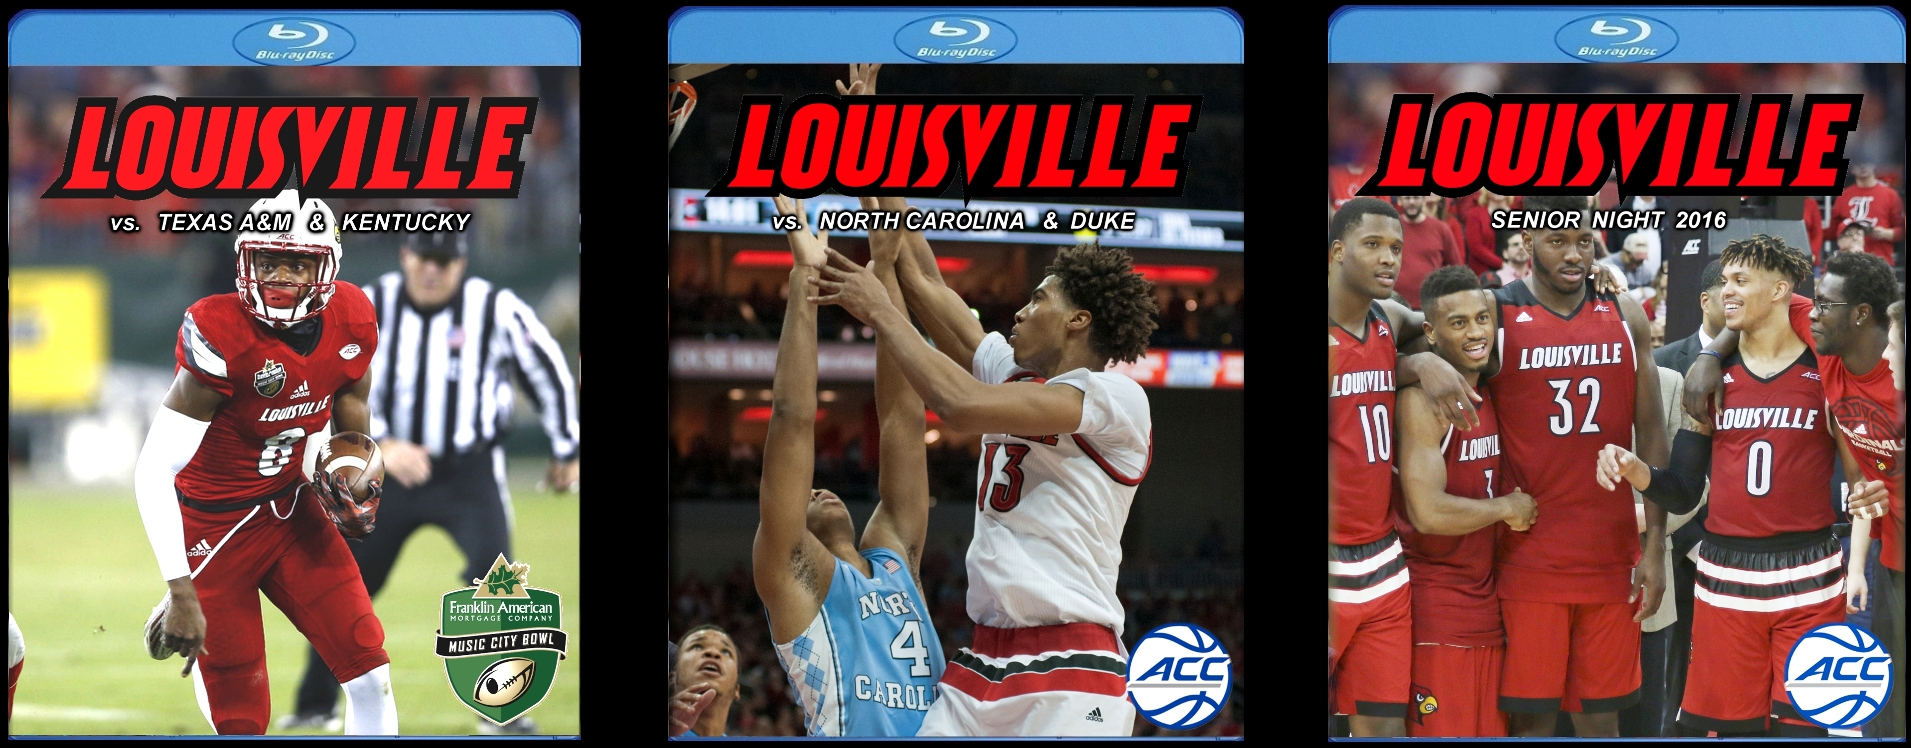 Year of the Cardinal Blu-rays (Louisville): National Championship, Final Four, Sugar Bowl, Russell Athletic Bowl, and more!